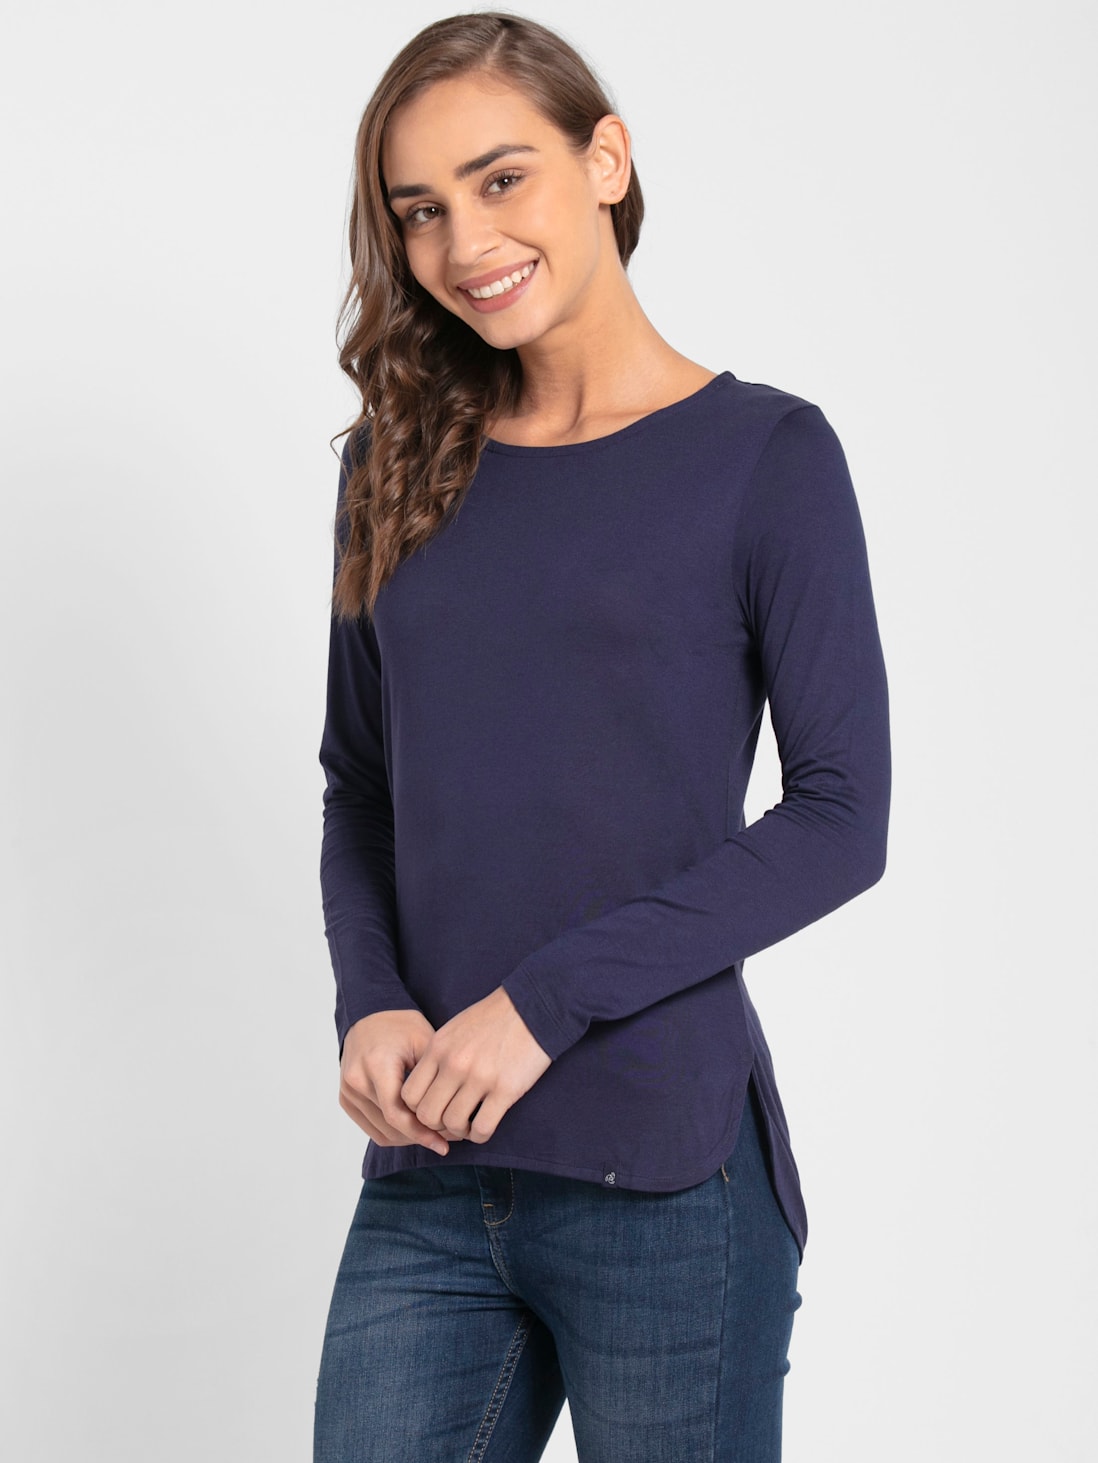 Buy Women's Micro Modal Cotton Relaxed Fit Solid Round Neck Full Sleeve ...